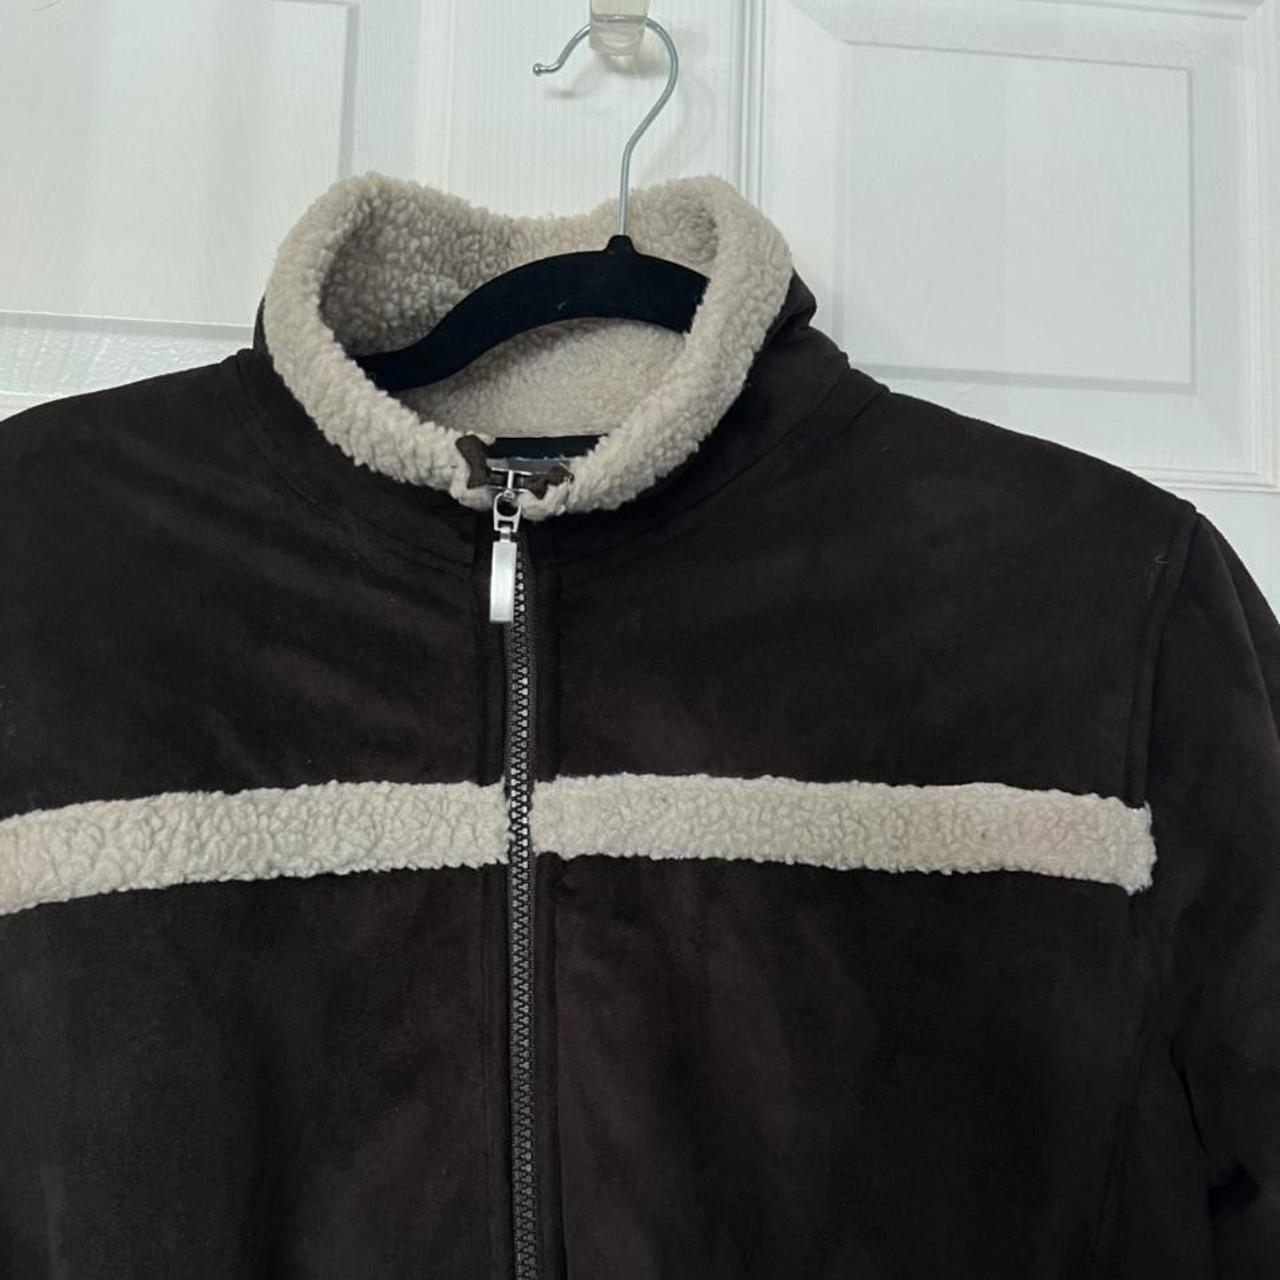 Product Image 2 - Trespass brown jacket!
Size L, fits